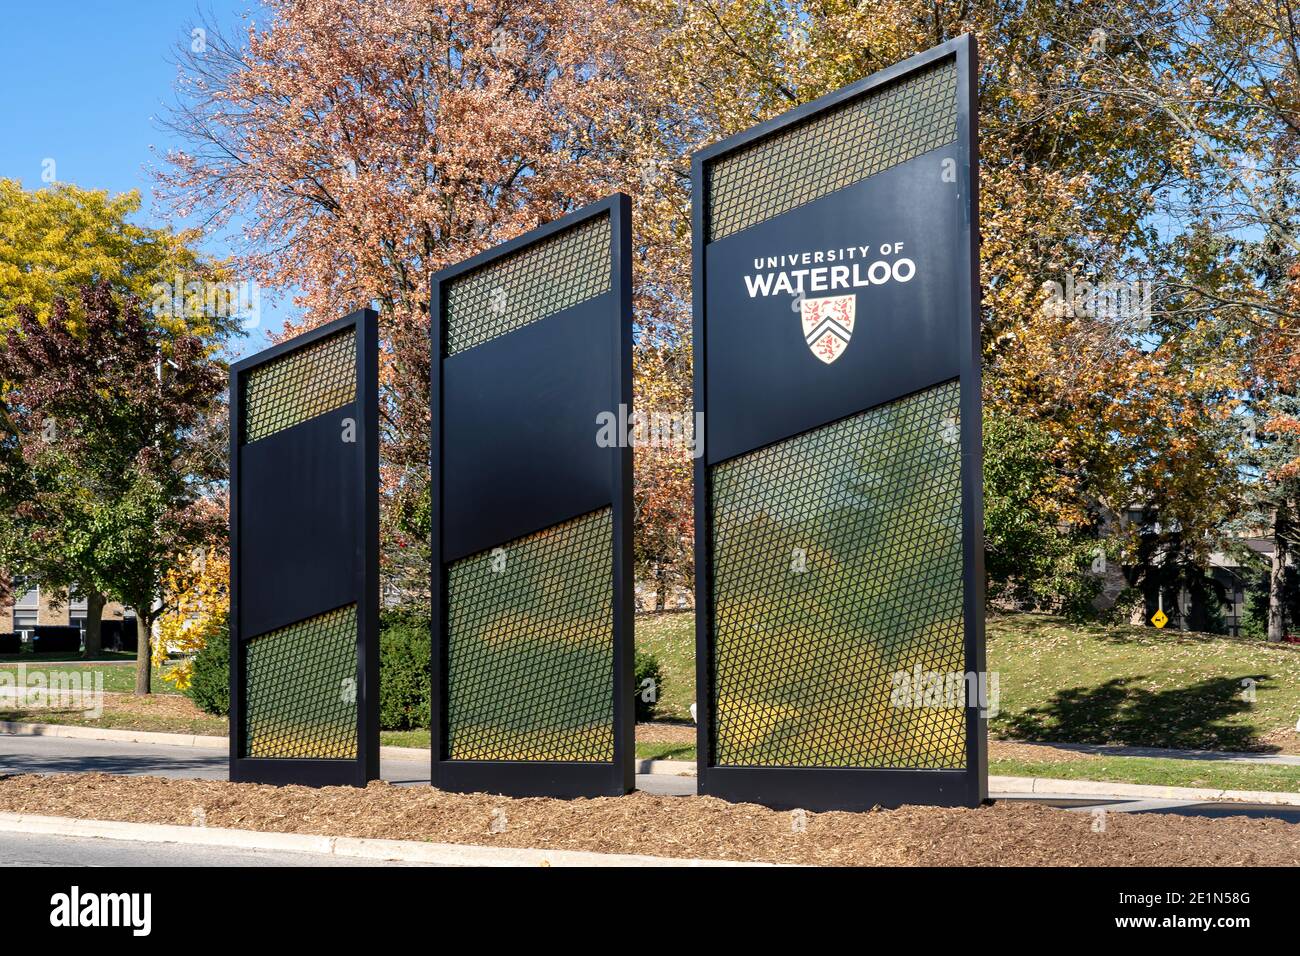 Waterloo, On, Canada - October 17, 2020: University of Waterloo (UW) pylon sign is seen at the main campus entrance in Waterloo, On, Canada Stock Photo